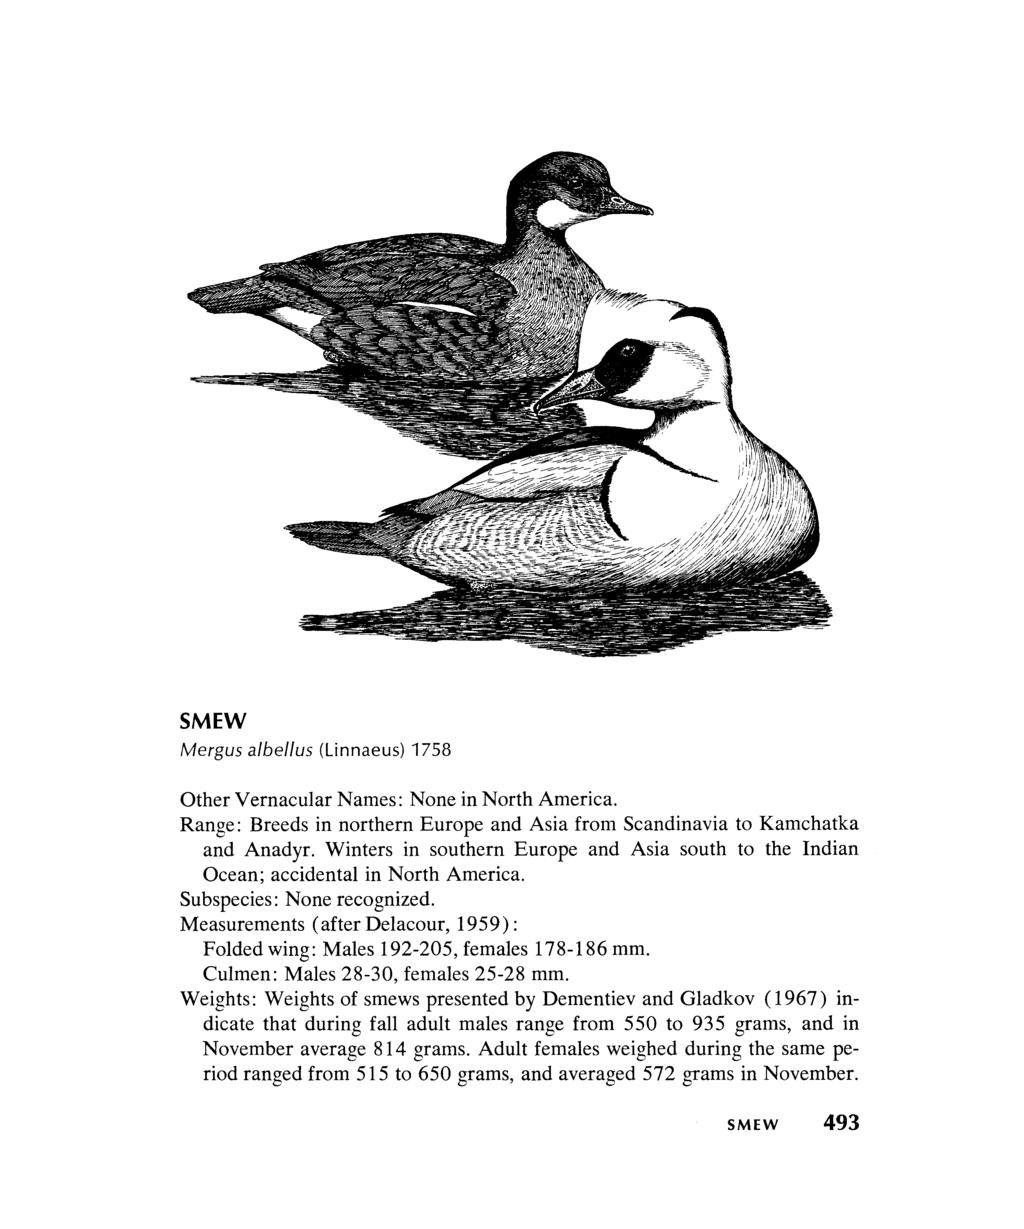 SMEW Mergus a/bel/us (Linnaeus) 1758 Other Vernacular Names: None in North America. Range: Breeds in northern Europe and Asia from Scandinavia to Kamchatka and Anadyr.